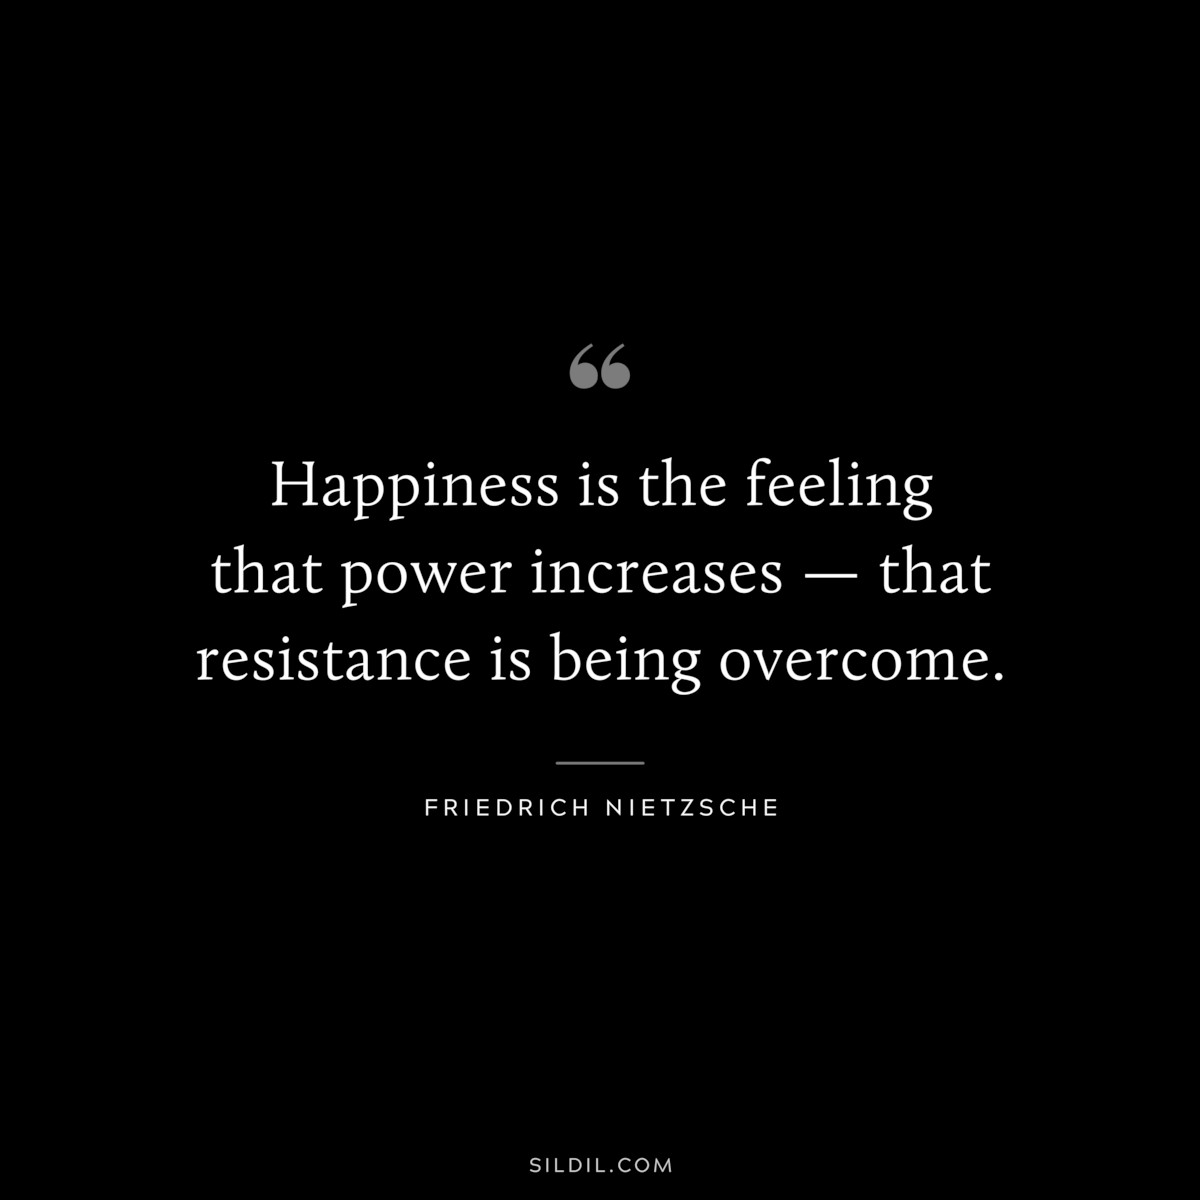 Happiness is the feeling that power increases — that resistance is being overcome. ― Friedrich Nietzsche